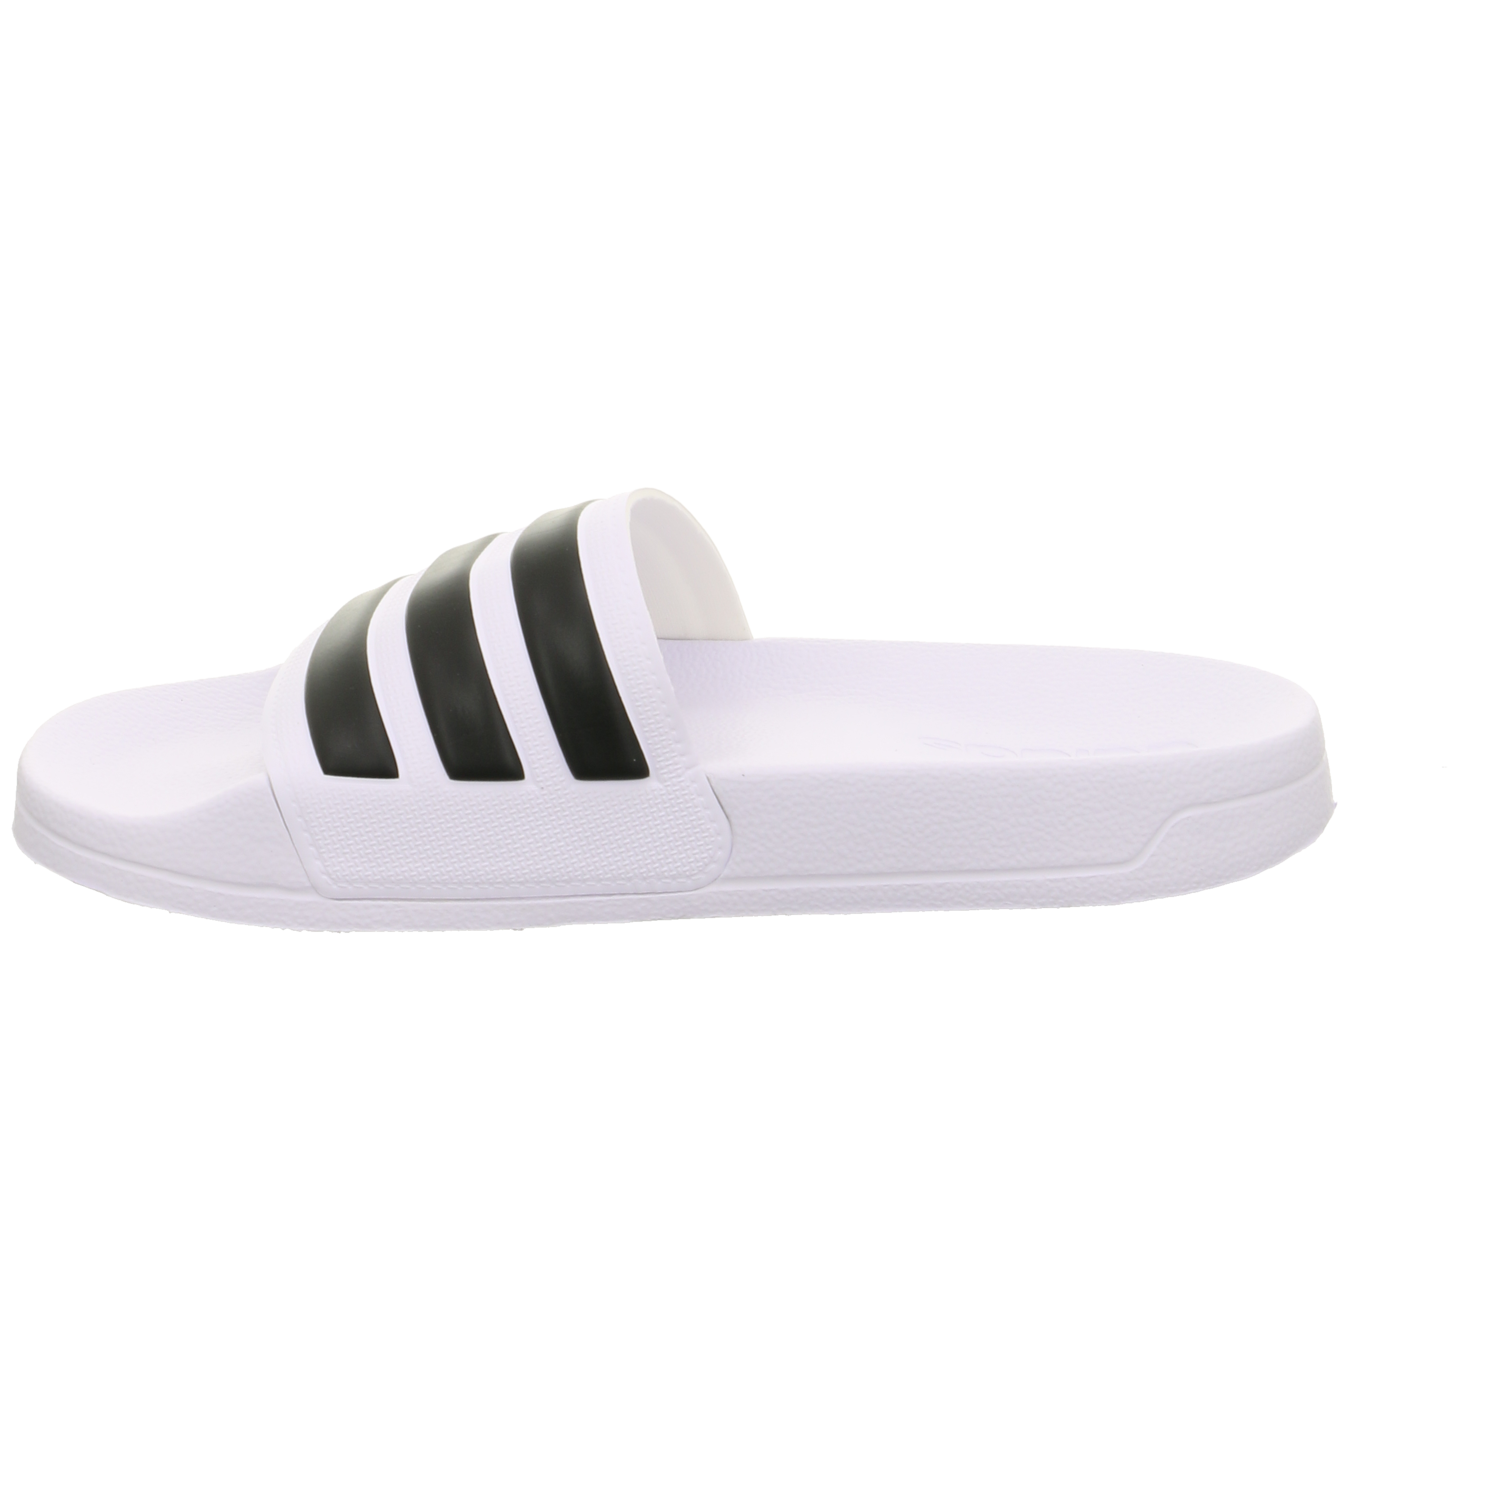 Adidas Casual-Pantolette weiß